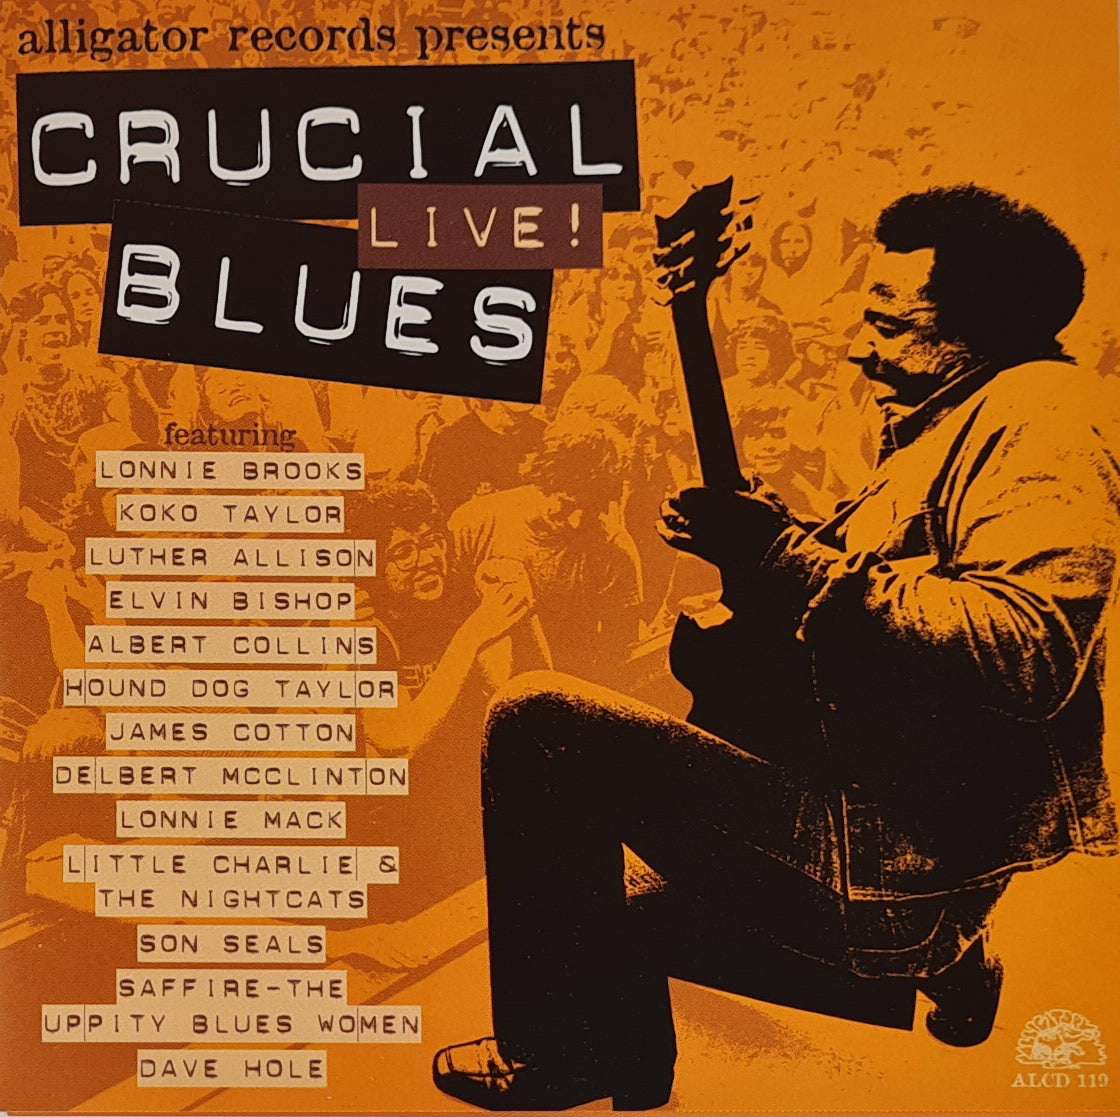 Alligator Records - Crucial Live! Blues (CD)